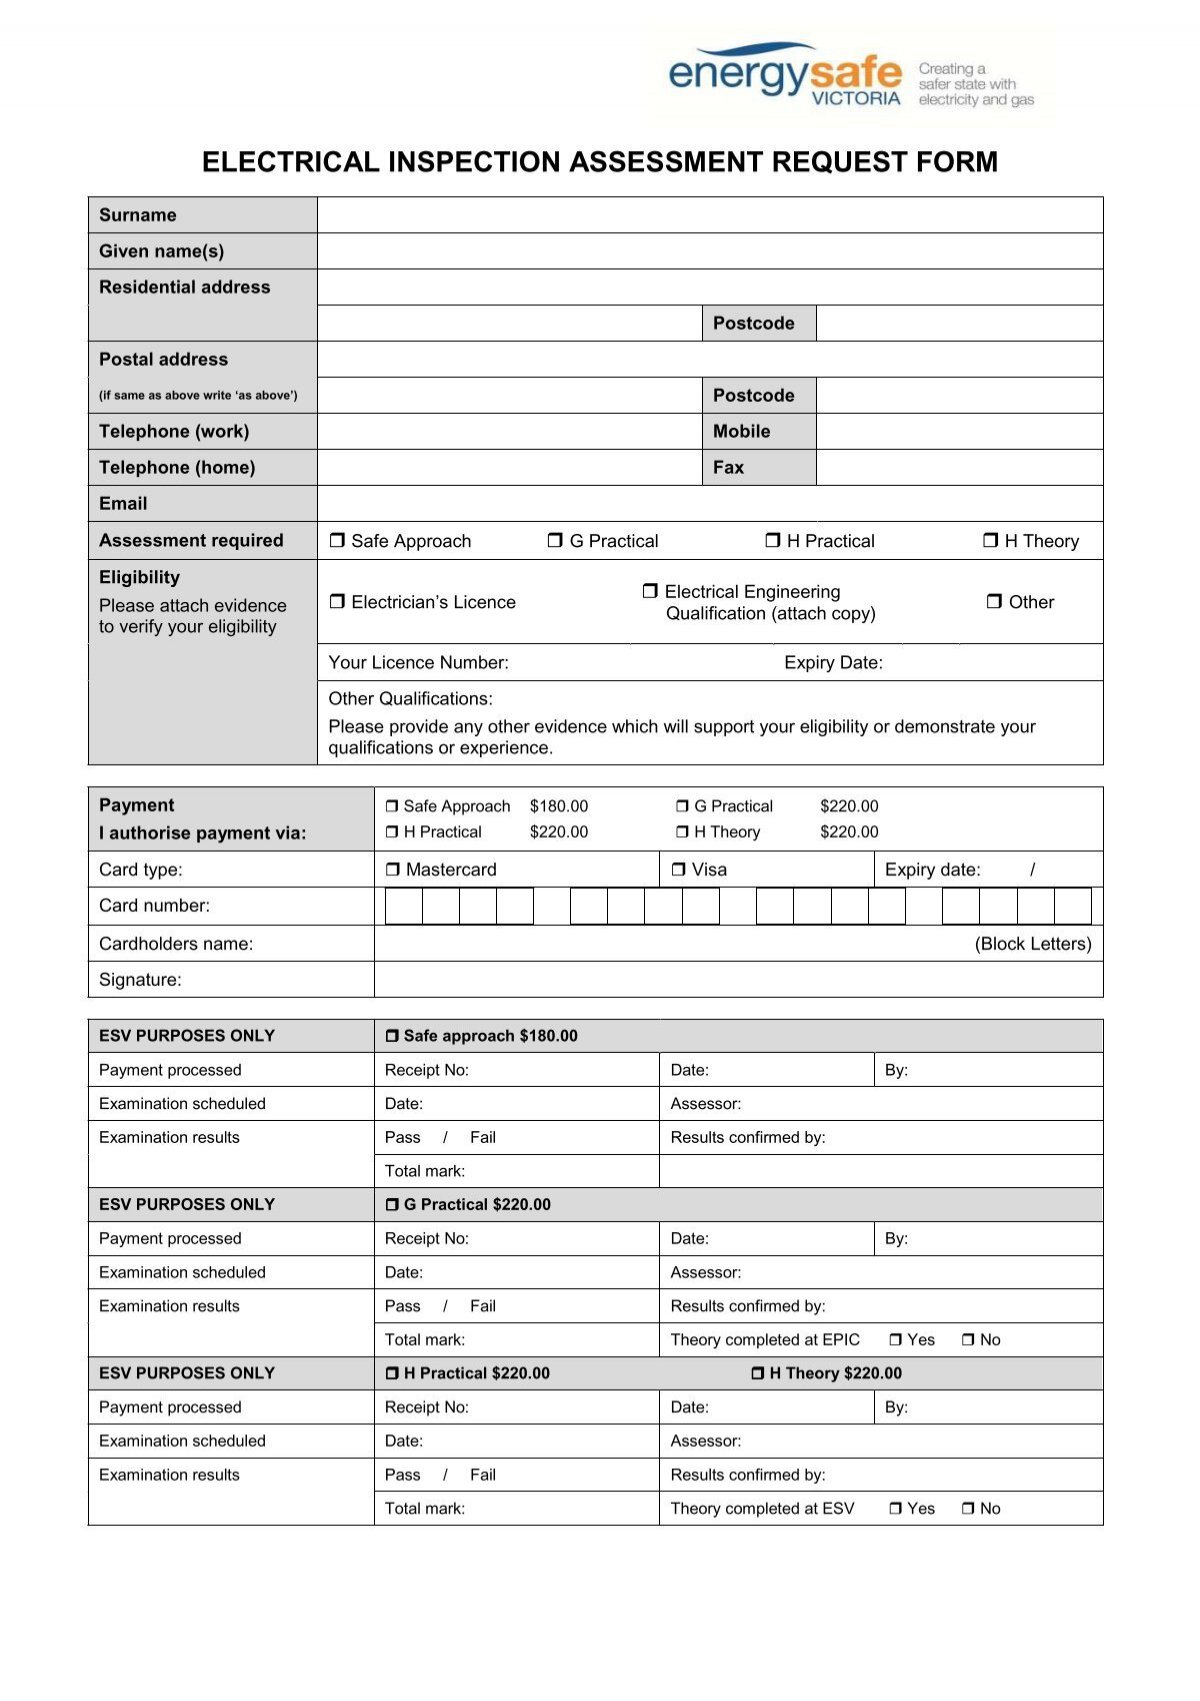 Electrical Inspection Assessment Request Form - Energy Safe Victoria